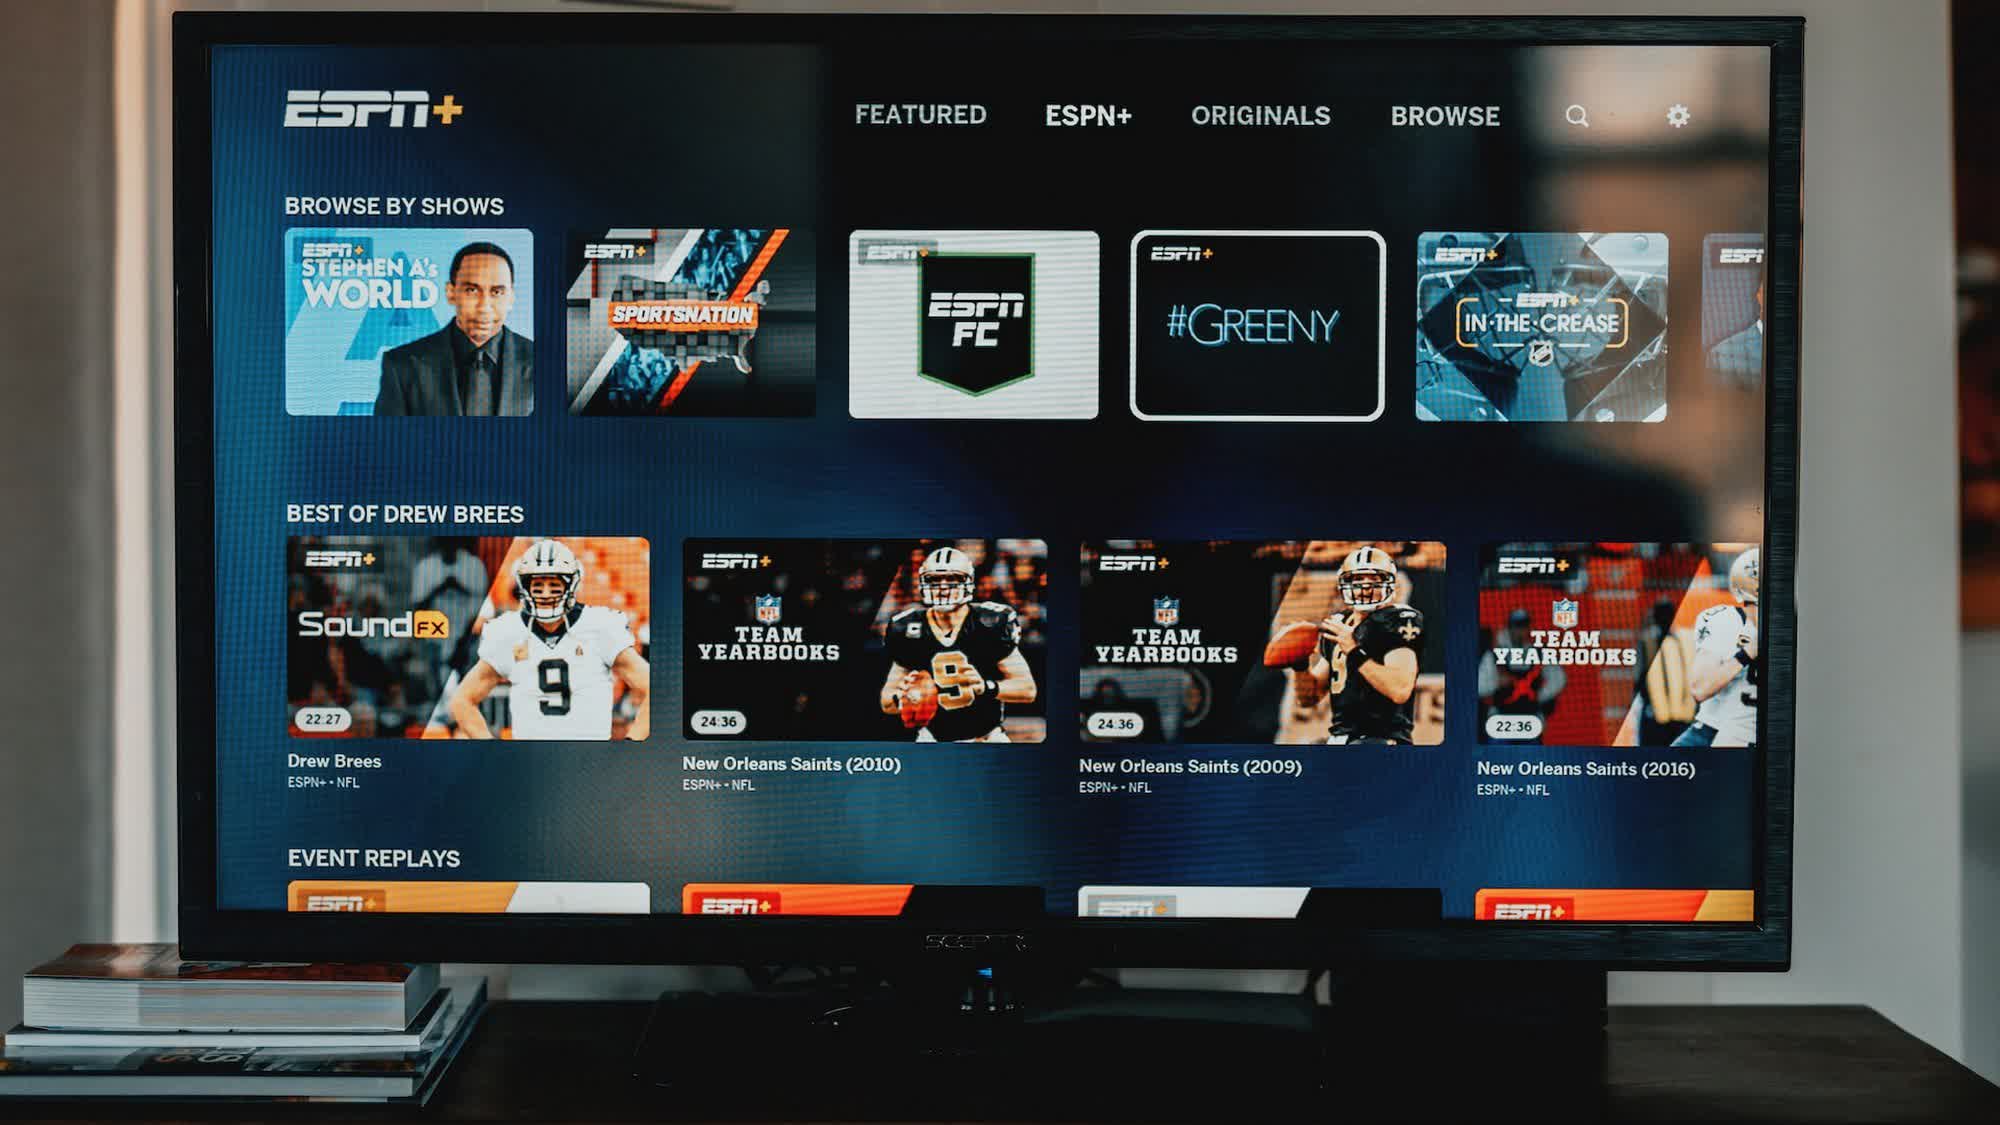 EFF urges FTC to sanction Amazon for selling malware-loaded Android TV boxes